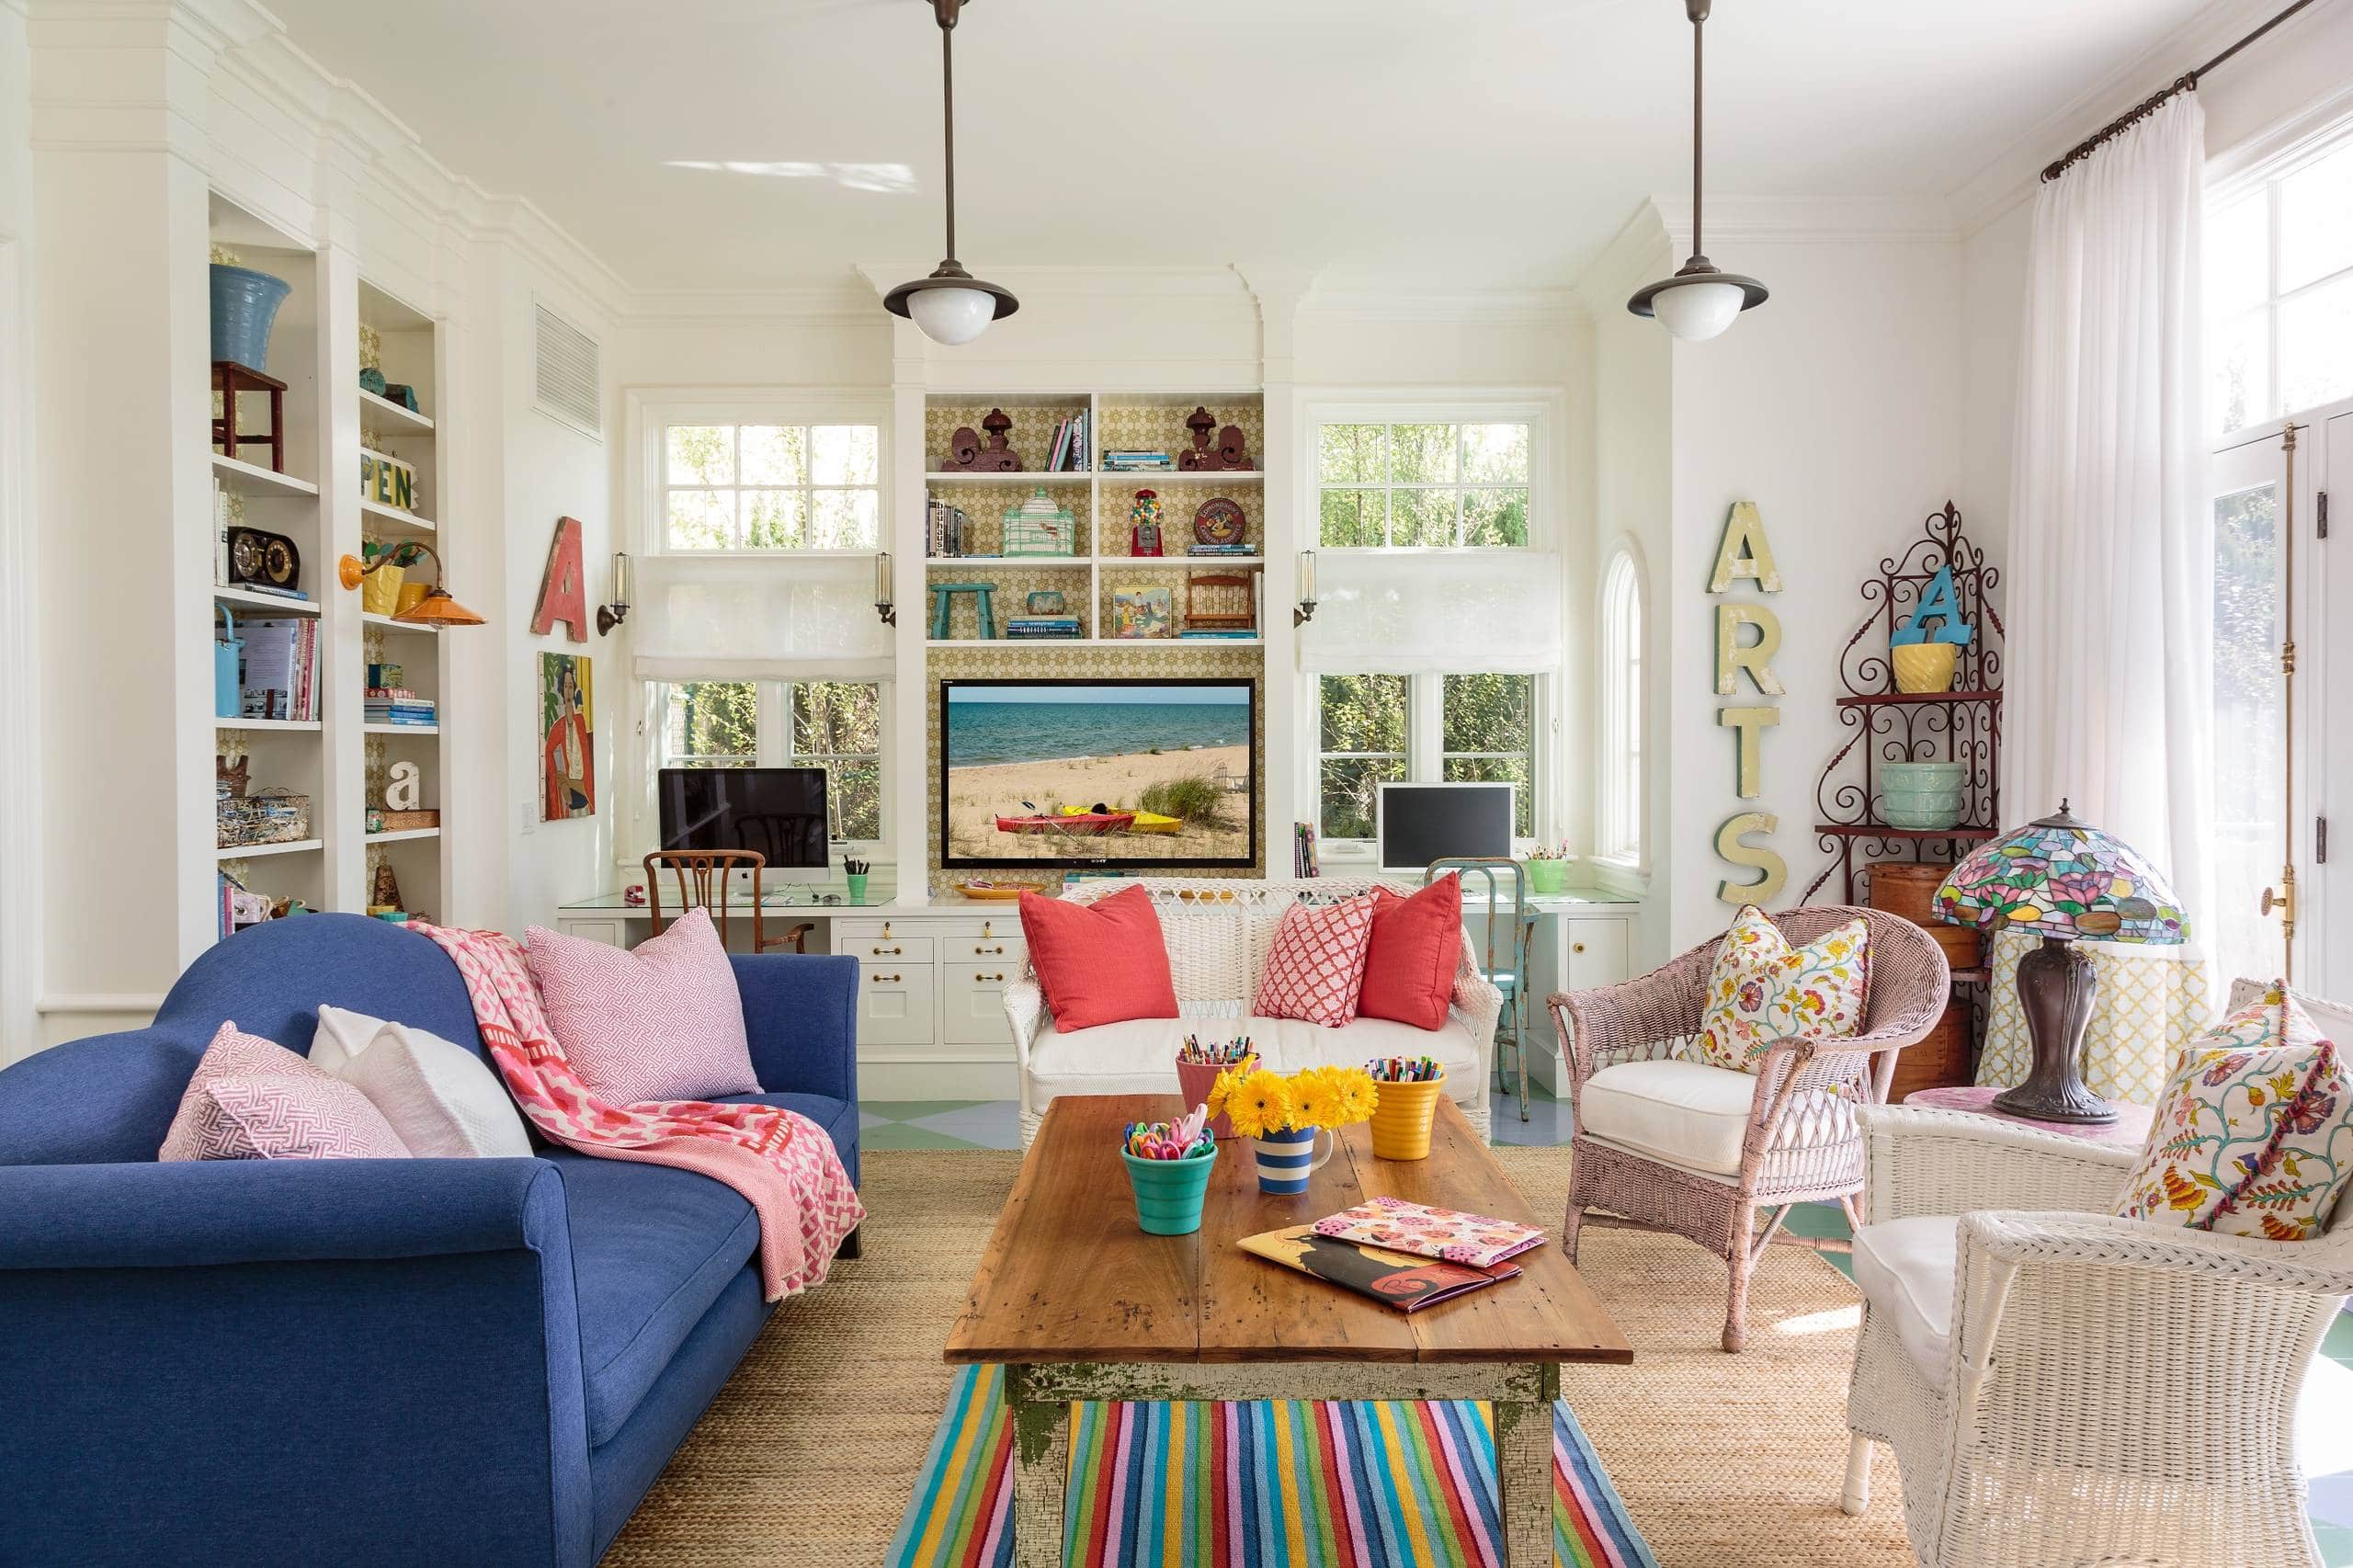 Living room in beach english cottage style featuring colorful pillows